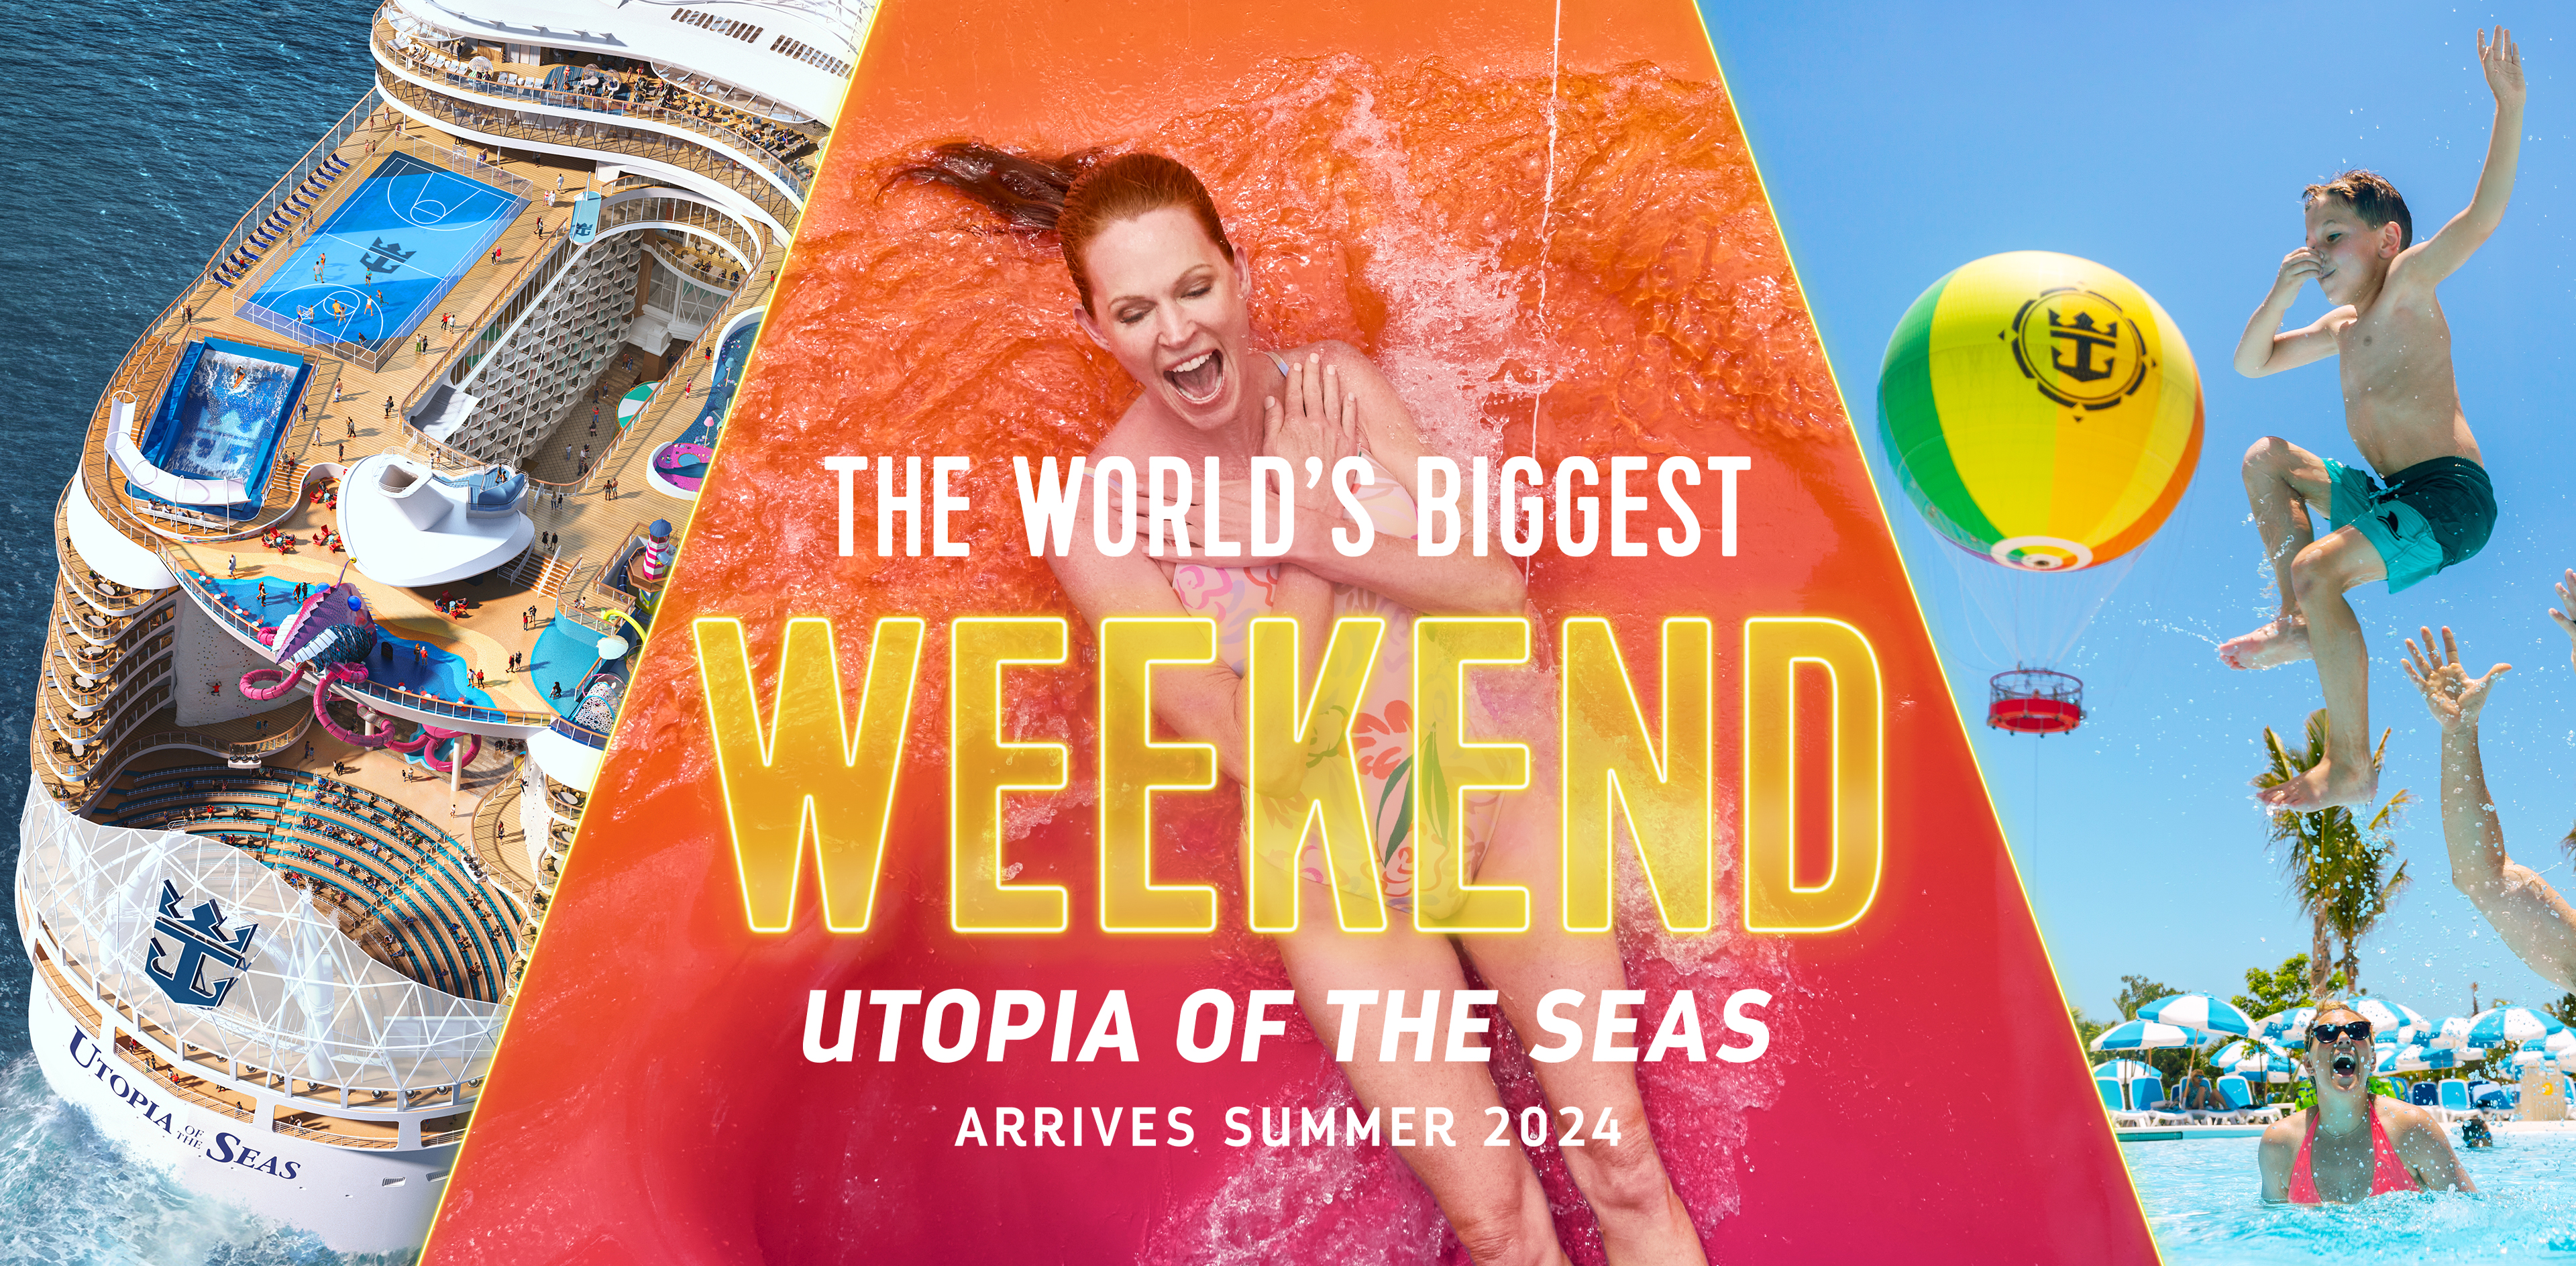 Utopia of the Seas - Weekends will never be the same! 